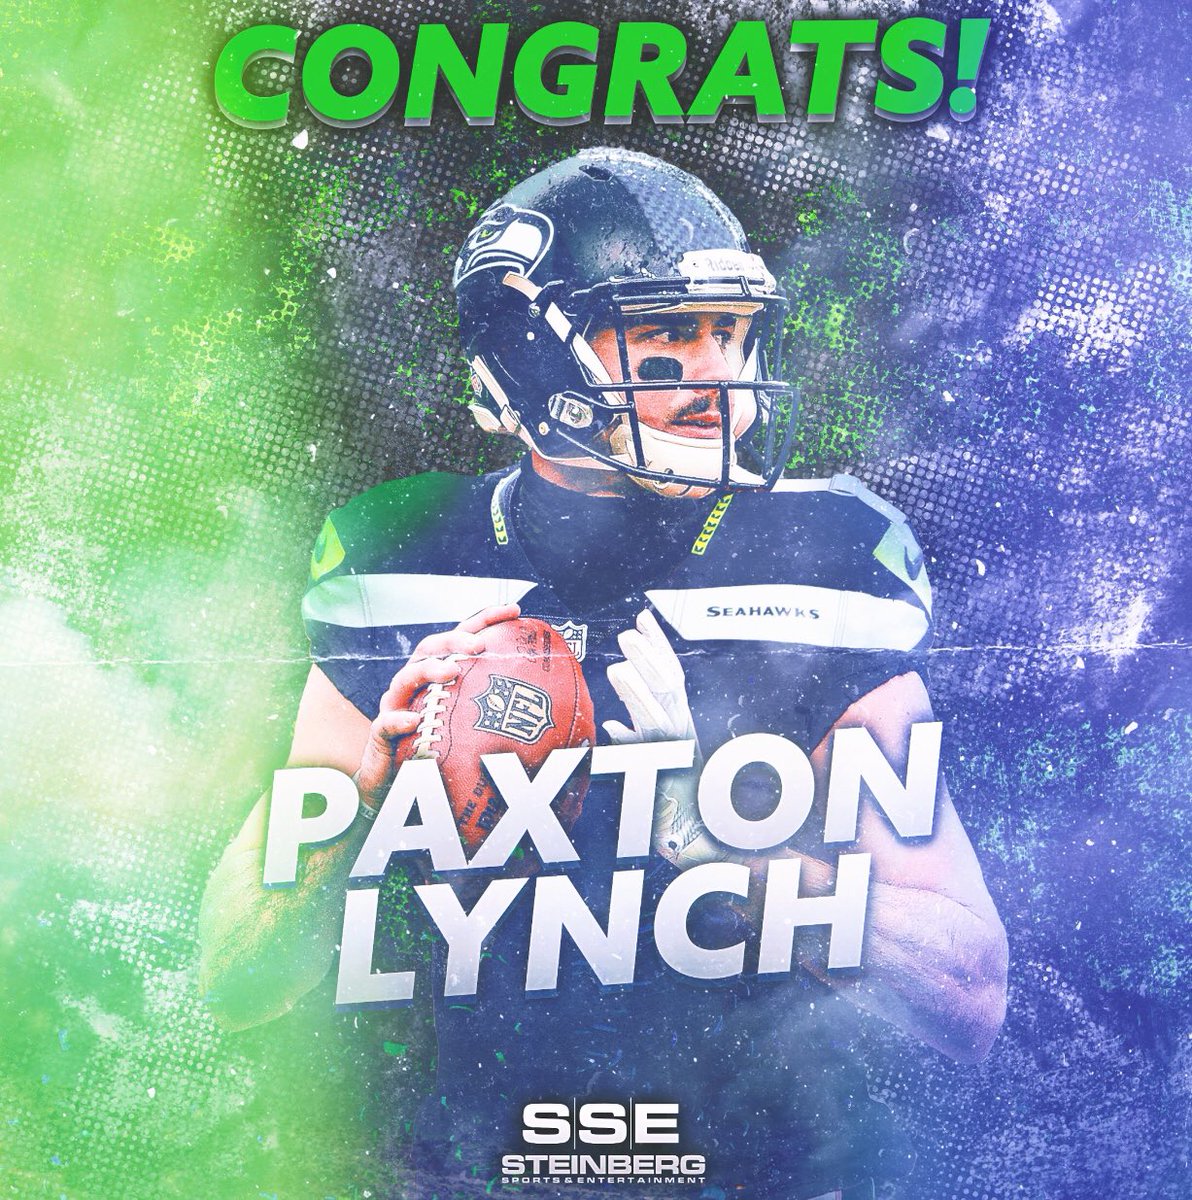 Congratulations to @PaxtonLynch and the @Seahawks ! Can't wait to see him in the new uniform!